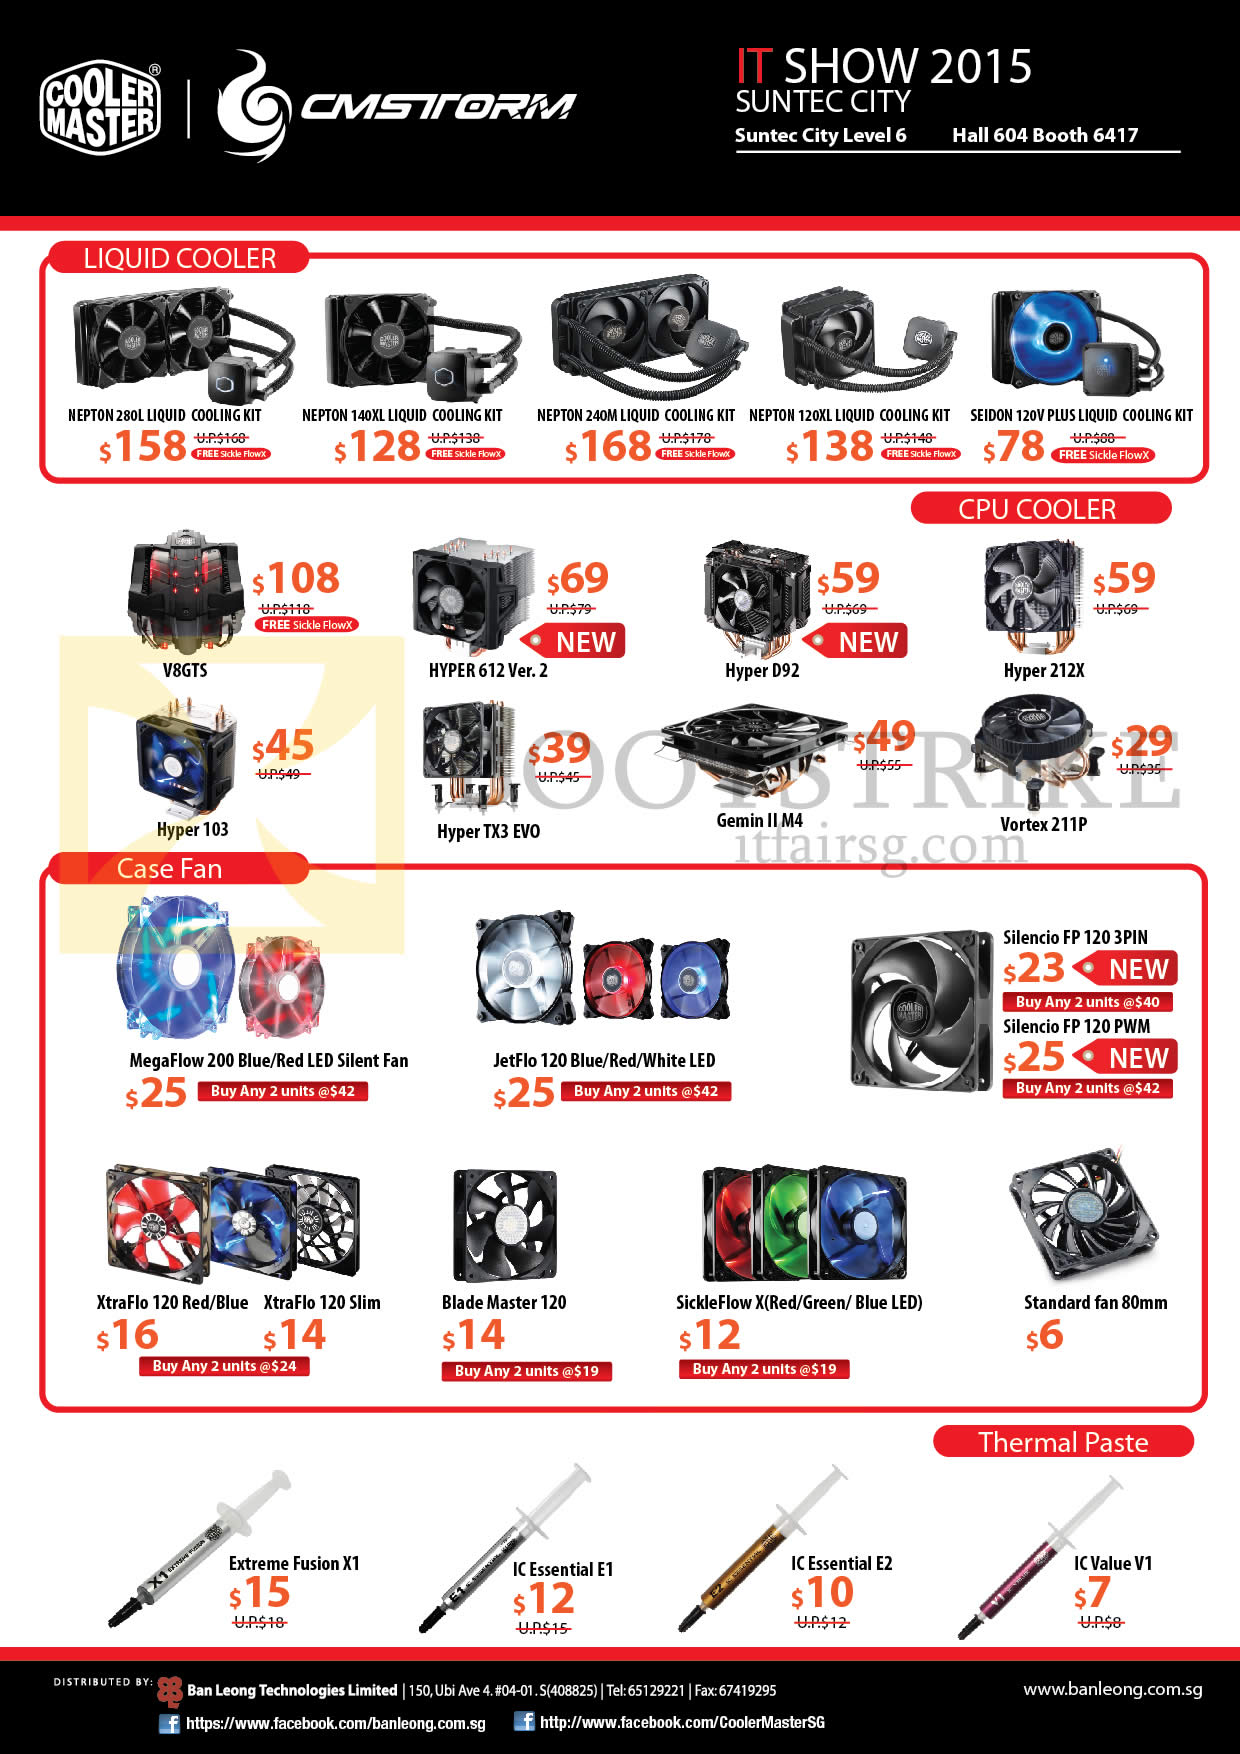 IT SHOW 2015 price list image brochure of Ban Leong Cooler Master CMStorm Liquid Cooler, Case Fans, CPU Coolers Hyper, Thermal Paste, Nepton, Seidon